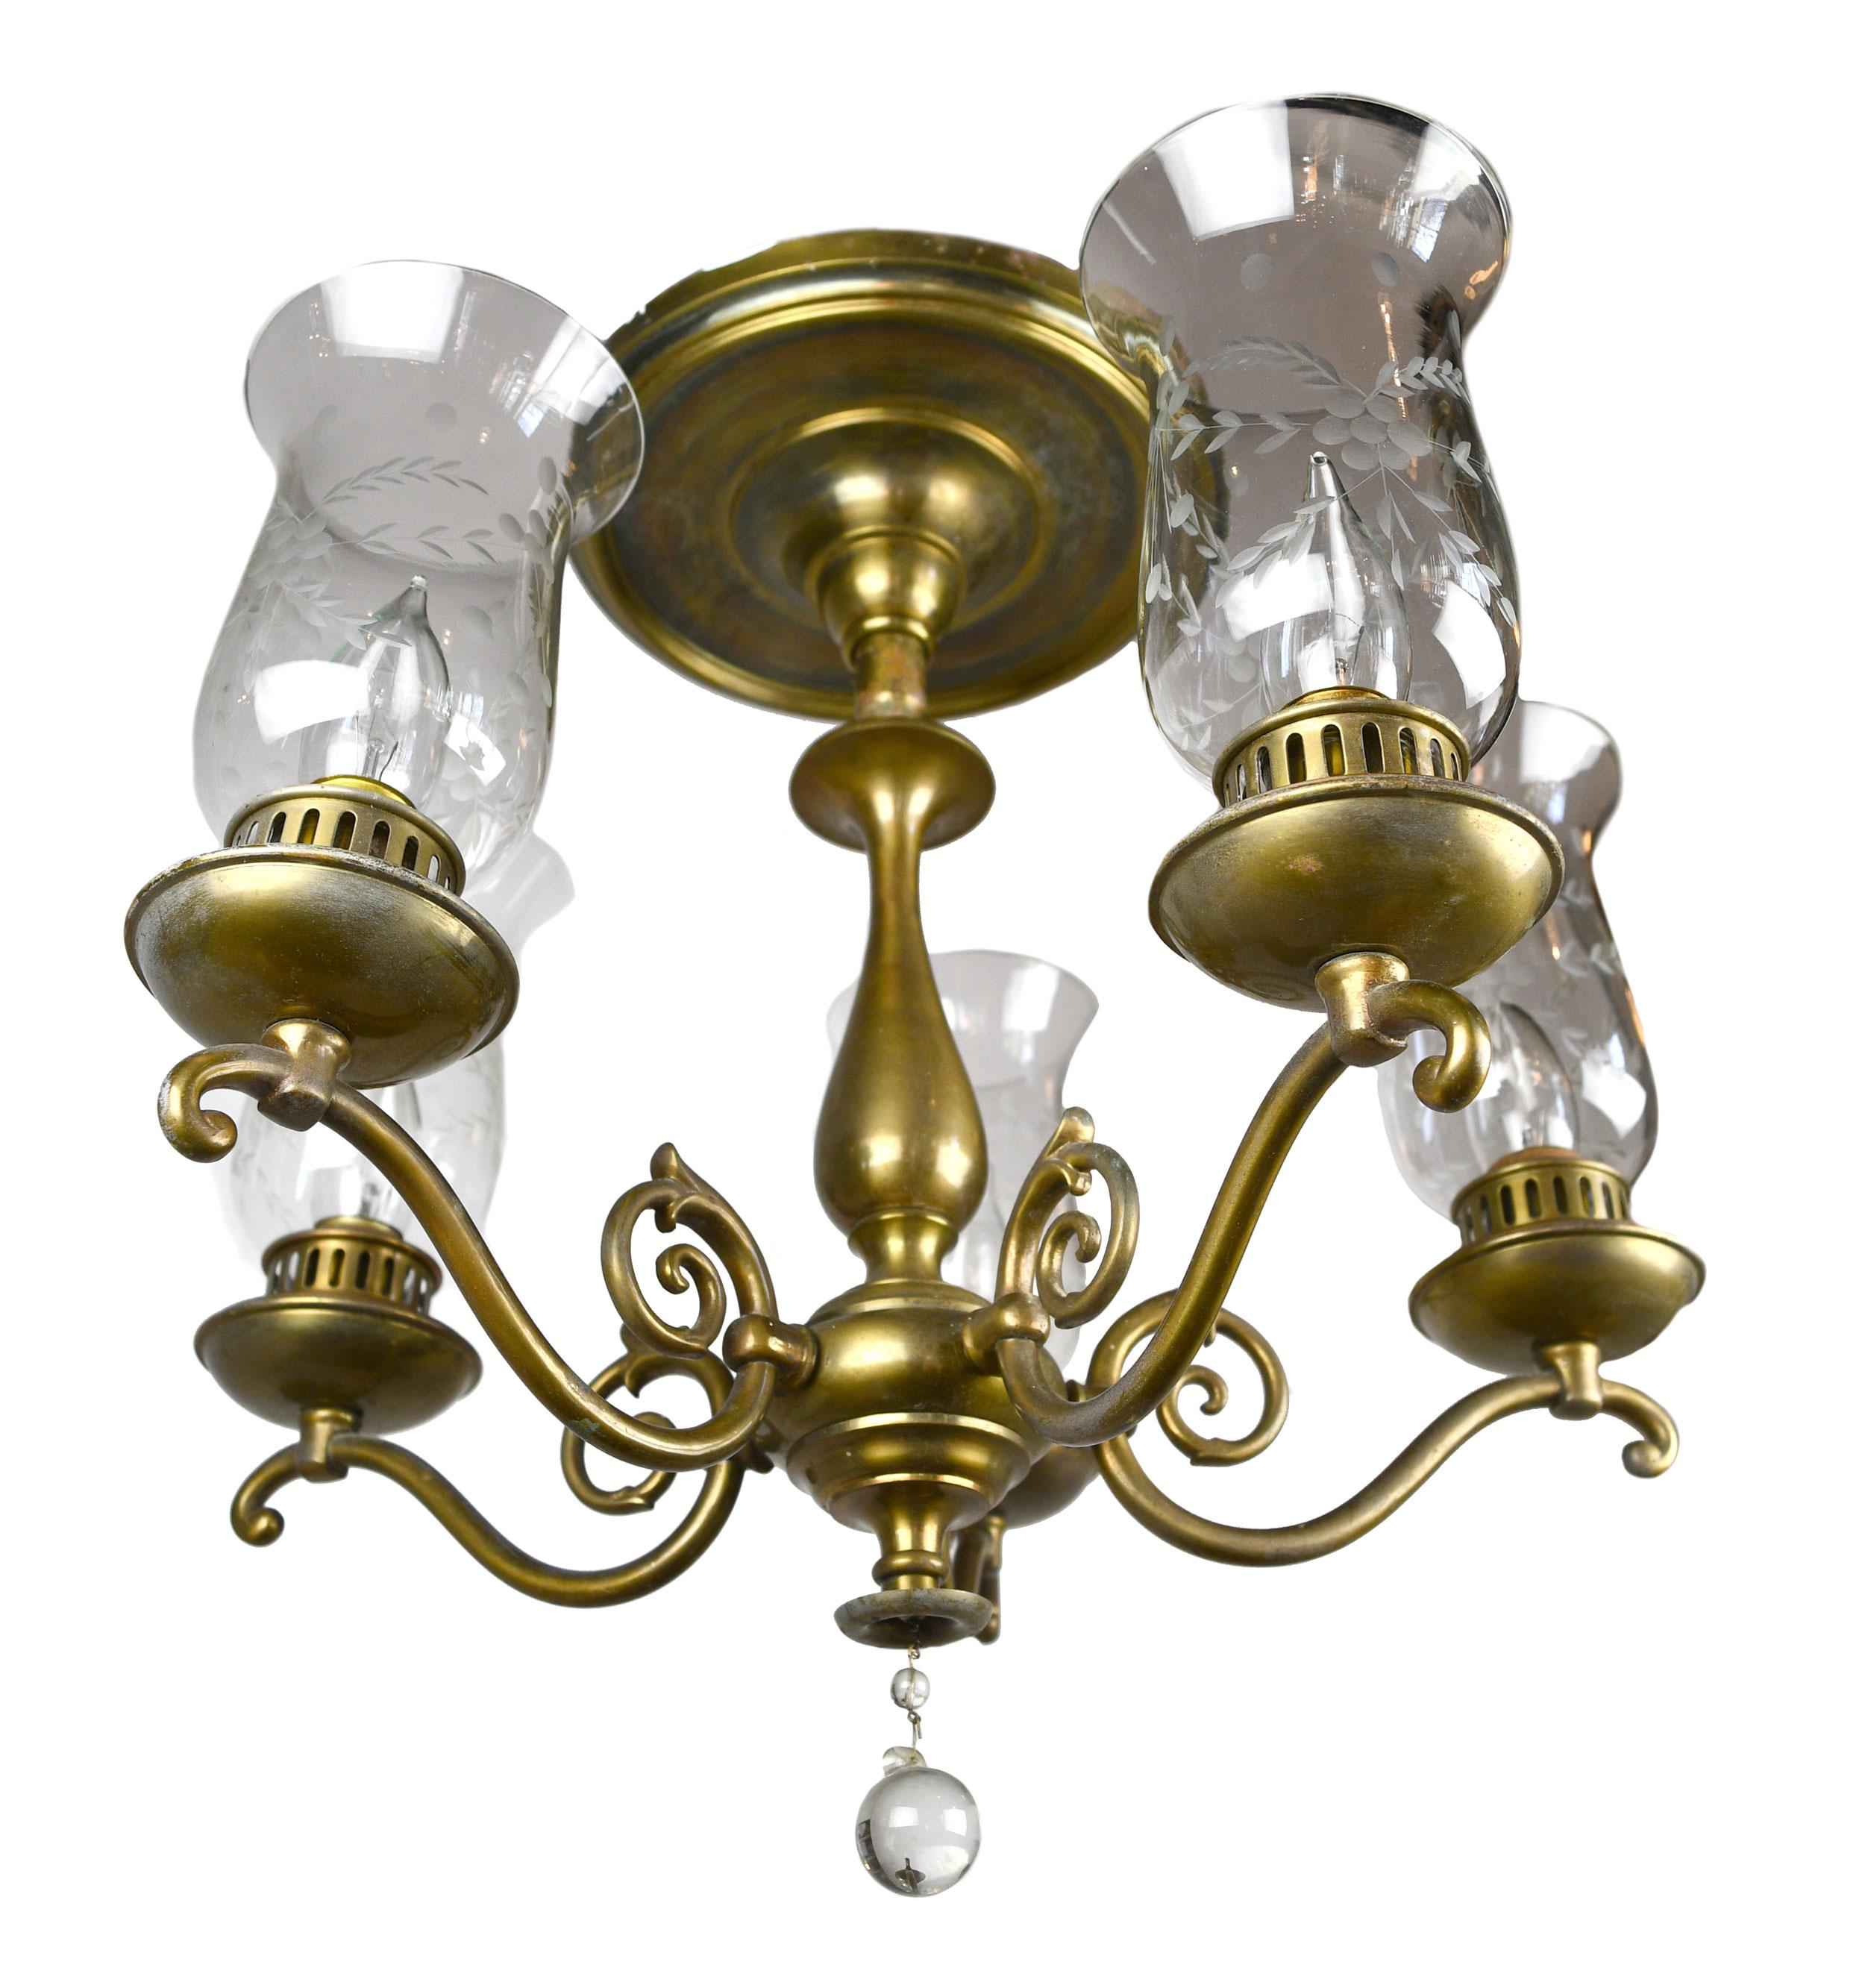 This lovely Beardslee chandelier features a Classic Federal style, handsome brass and 5 floral hurricane shades.